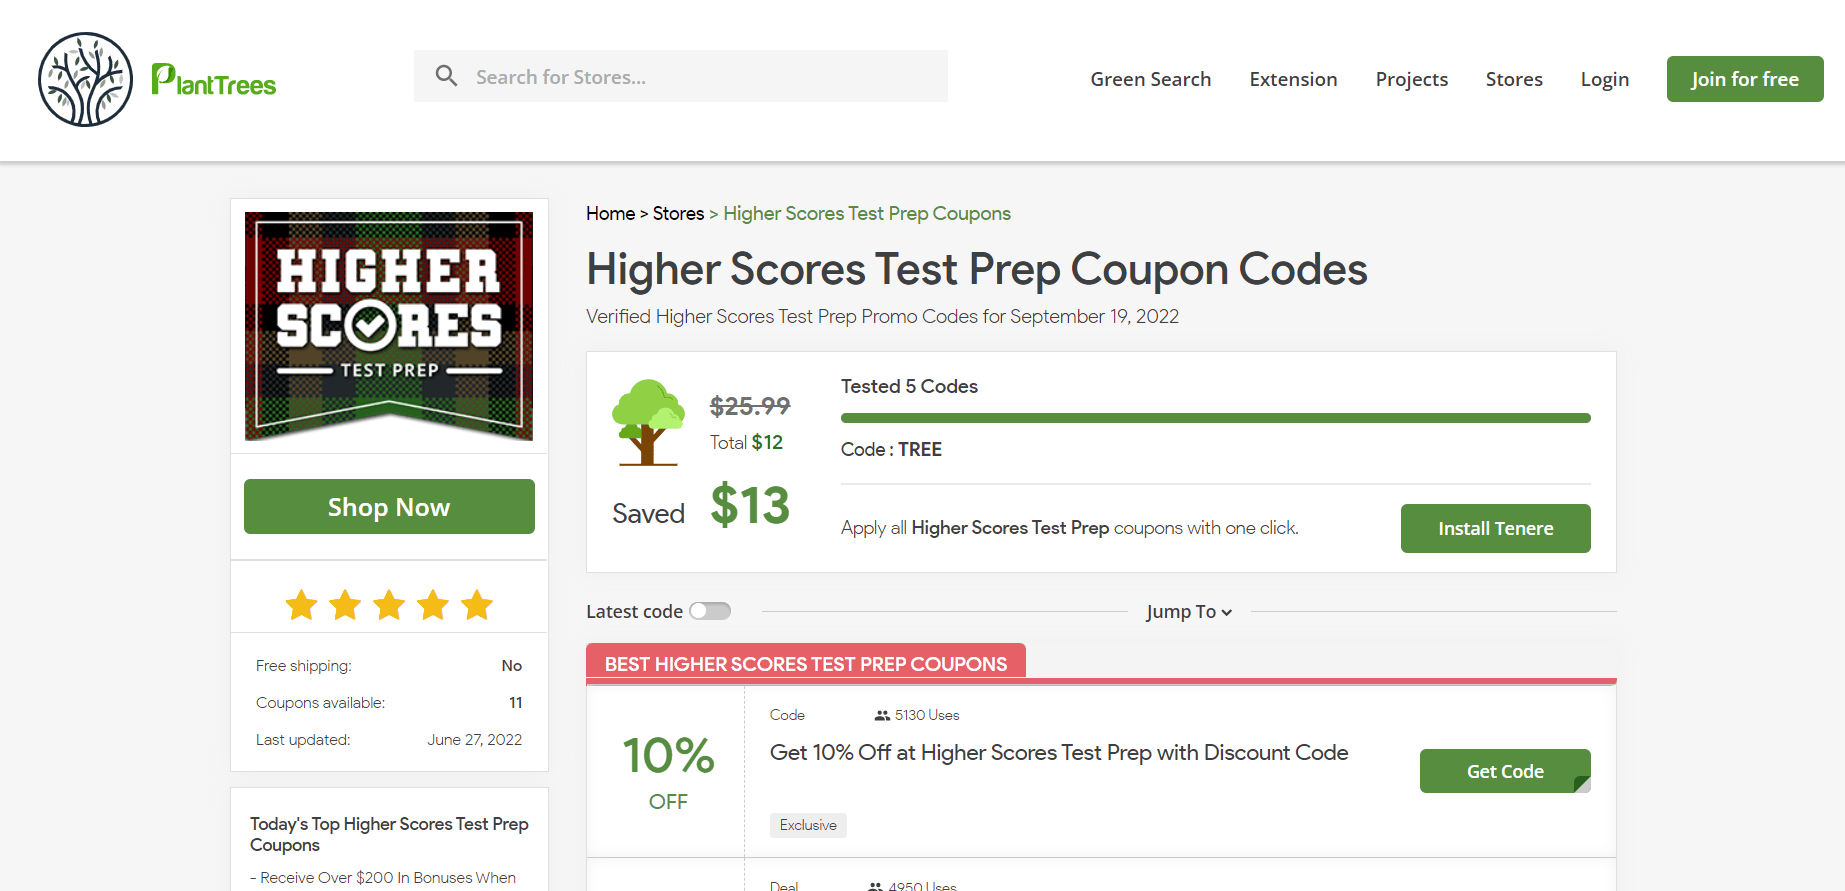 How to use Higher Scores Test Prep coupon